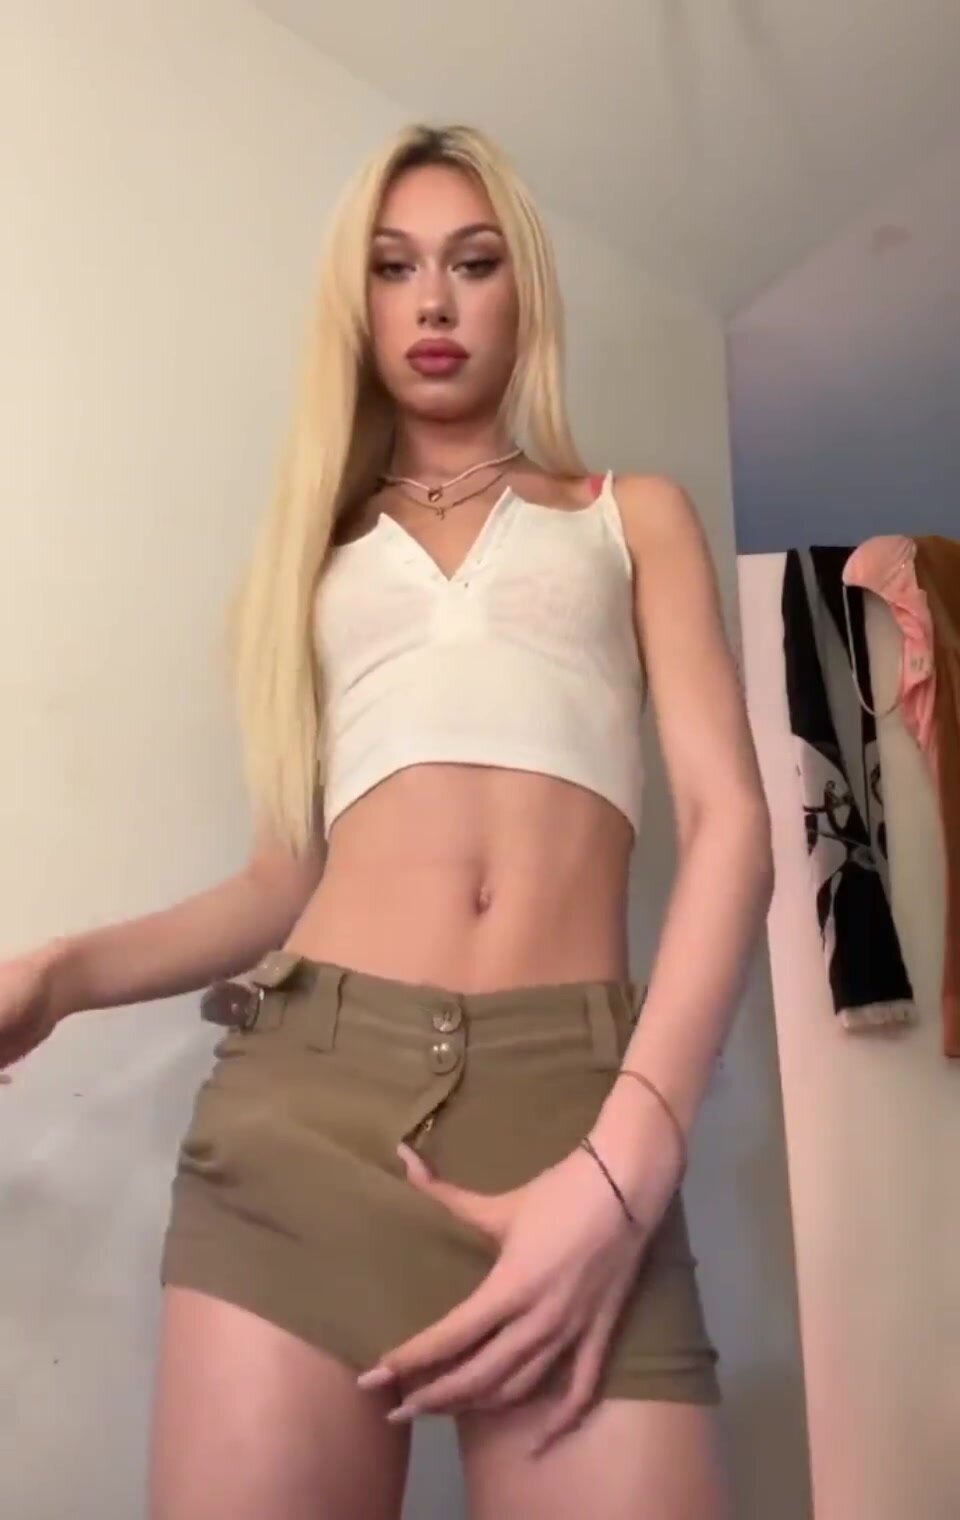 Hot Blondie TS Showing Her Sexy Bulge